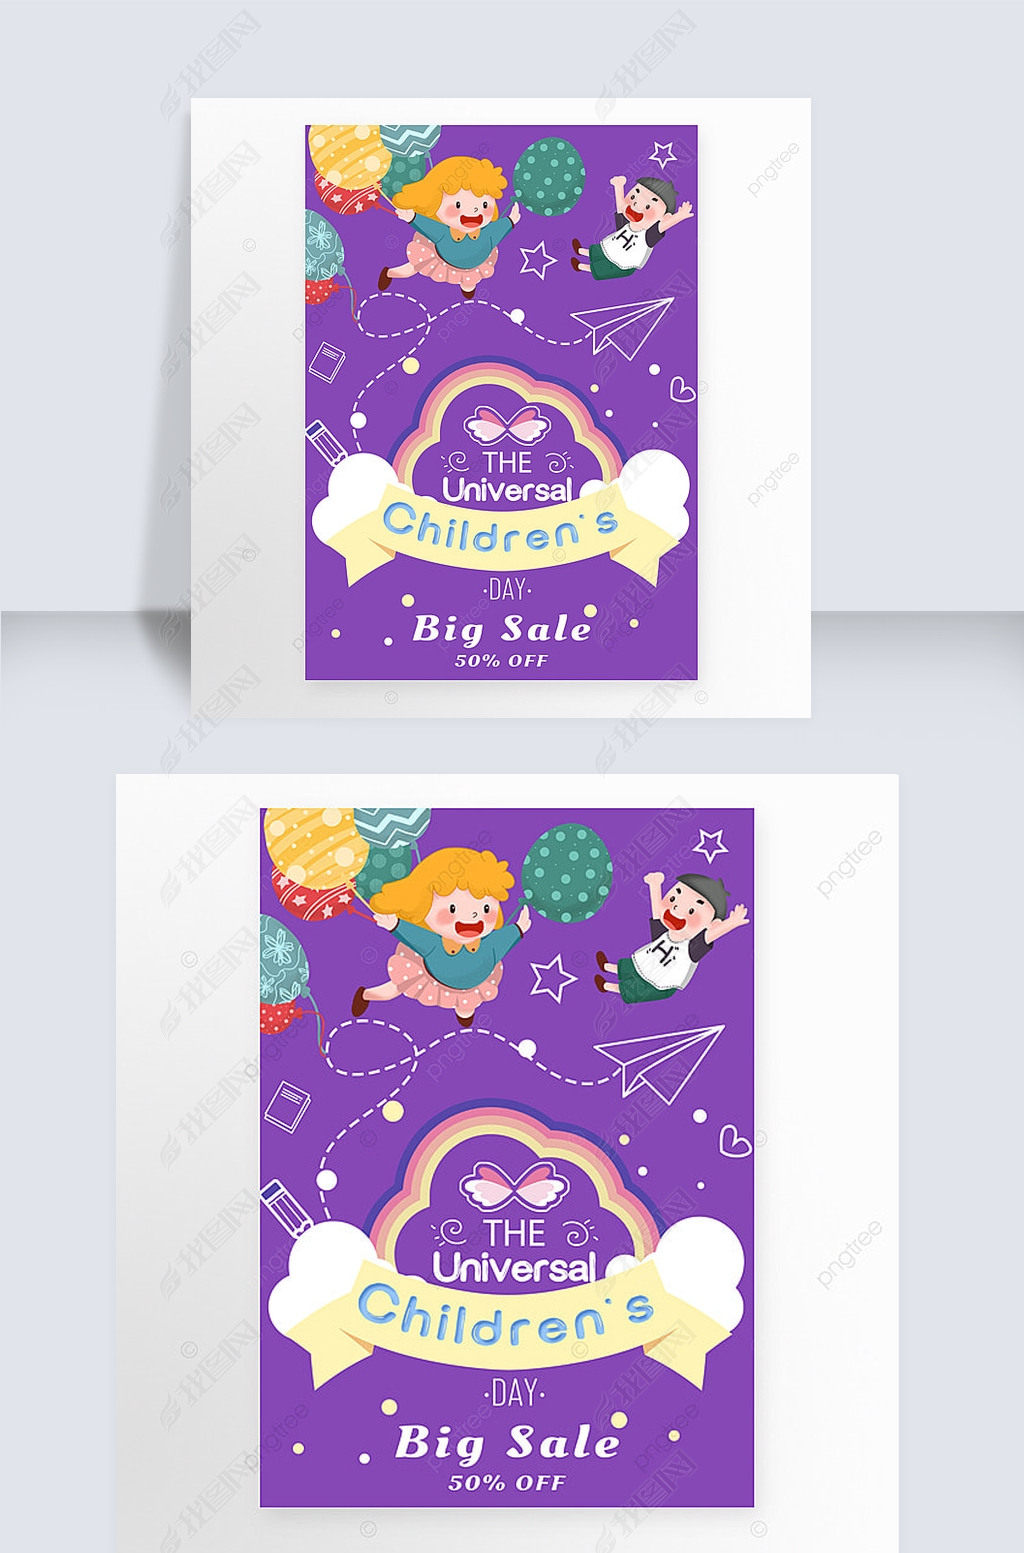 the universal children s day creative promotional posters